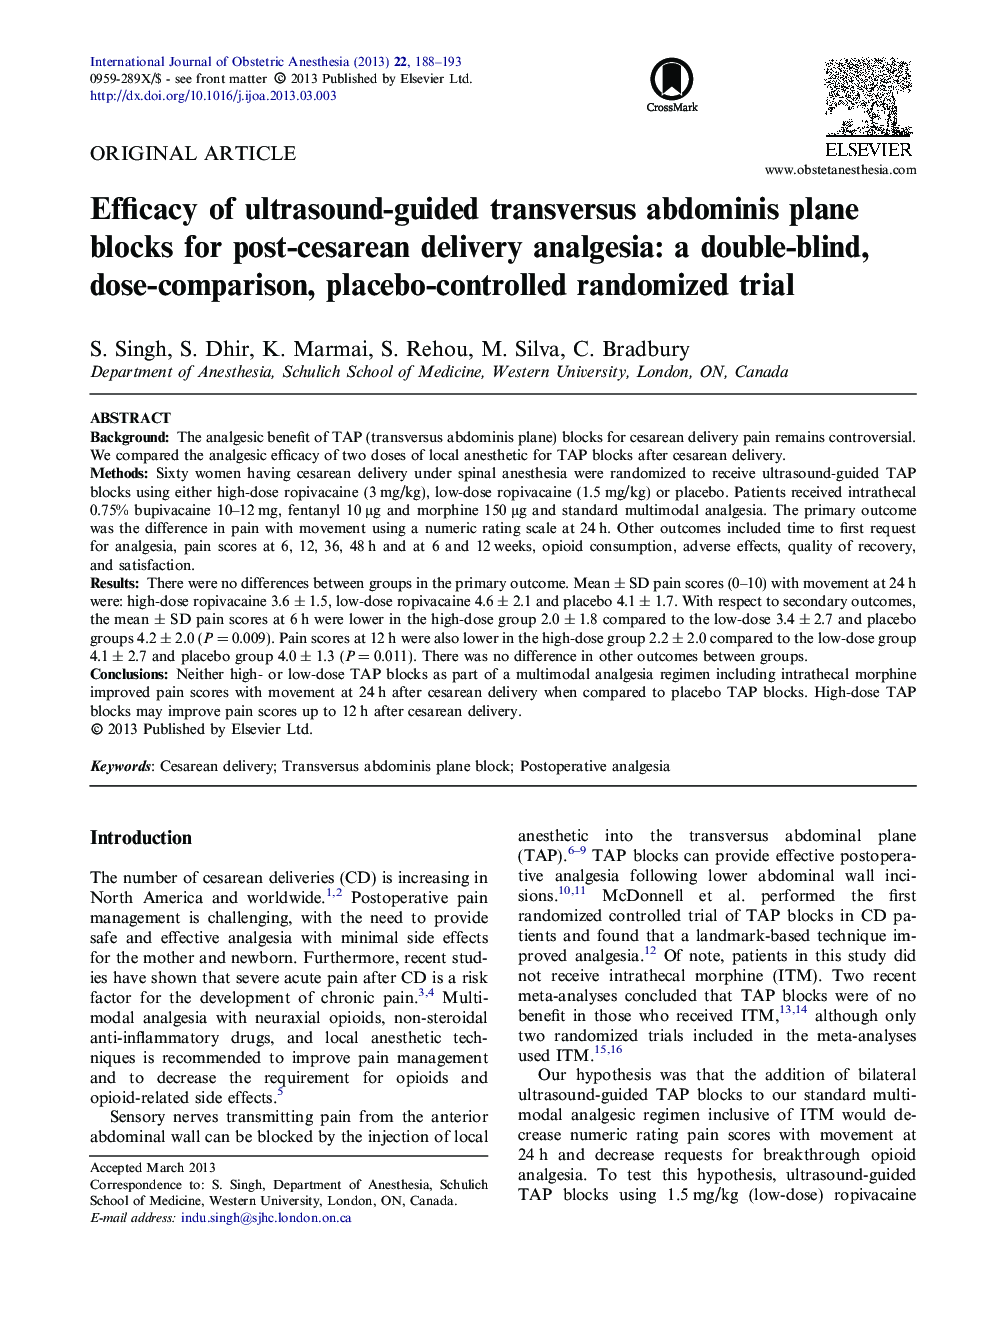 Efficacy of ultrasound-guided transversus abdominis plane blocks for post-cesarean delivery analgesia: a double-blind, dose-comparison, placebo-controlled randomized trial